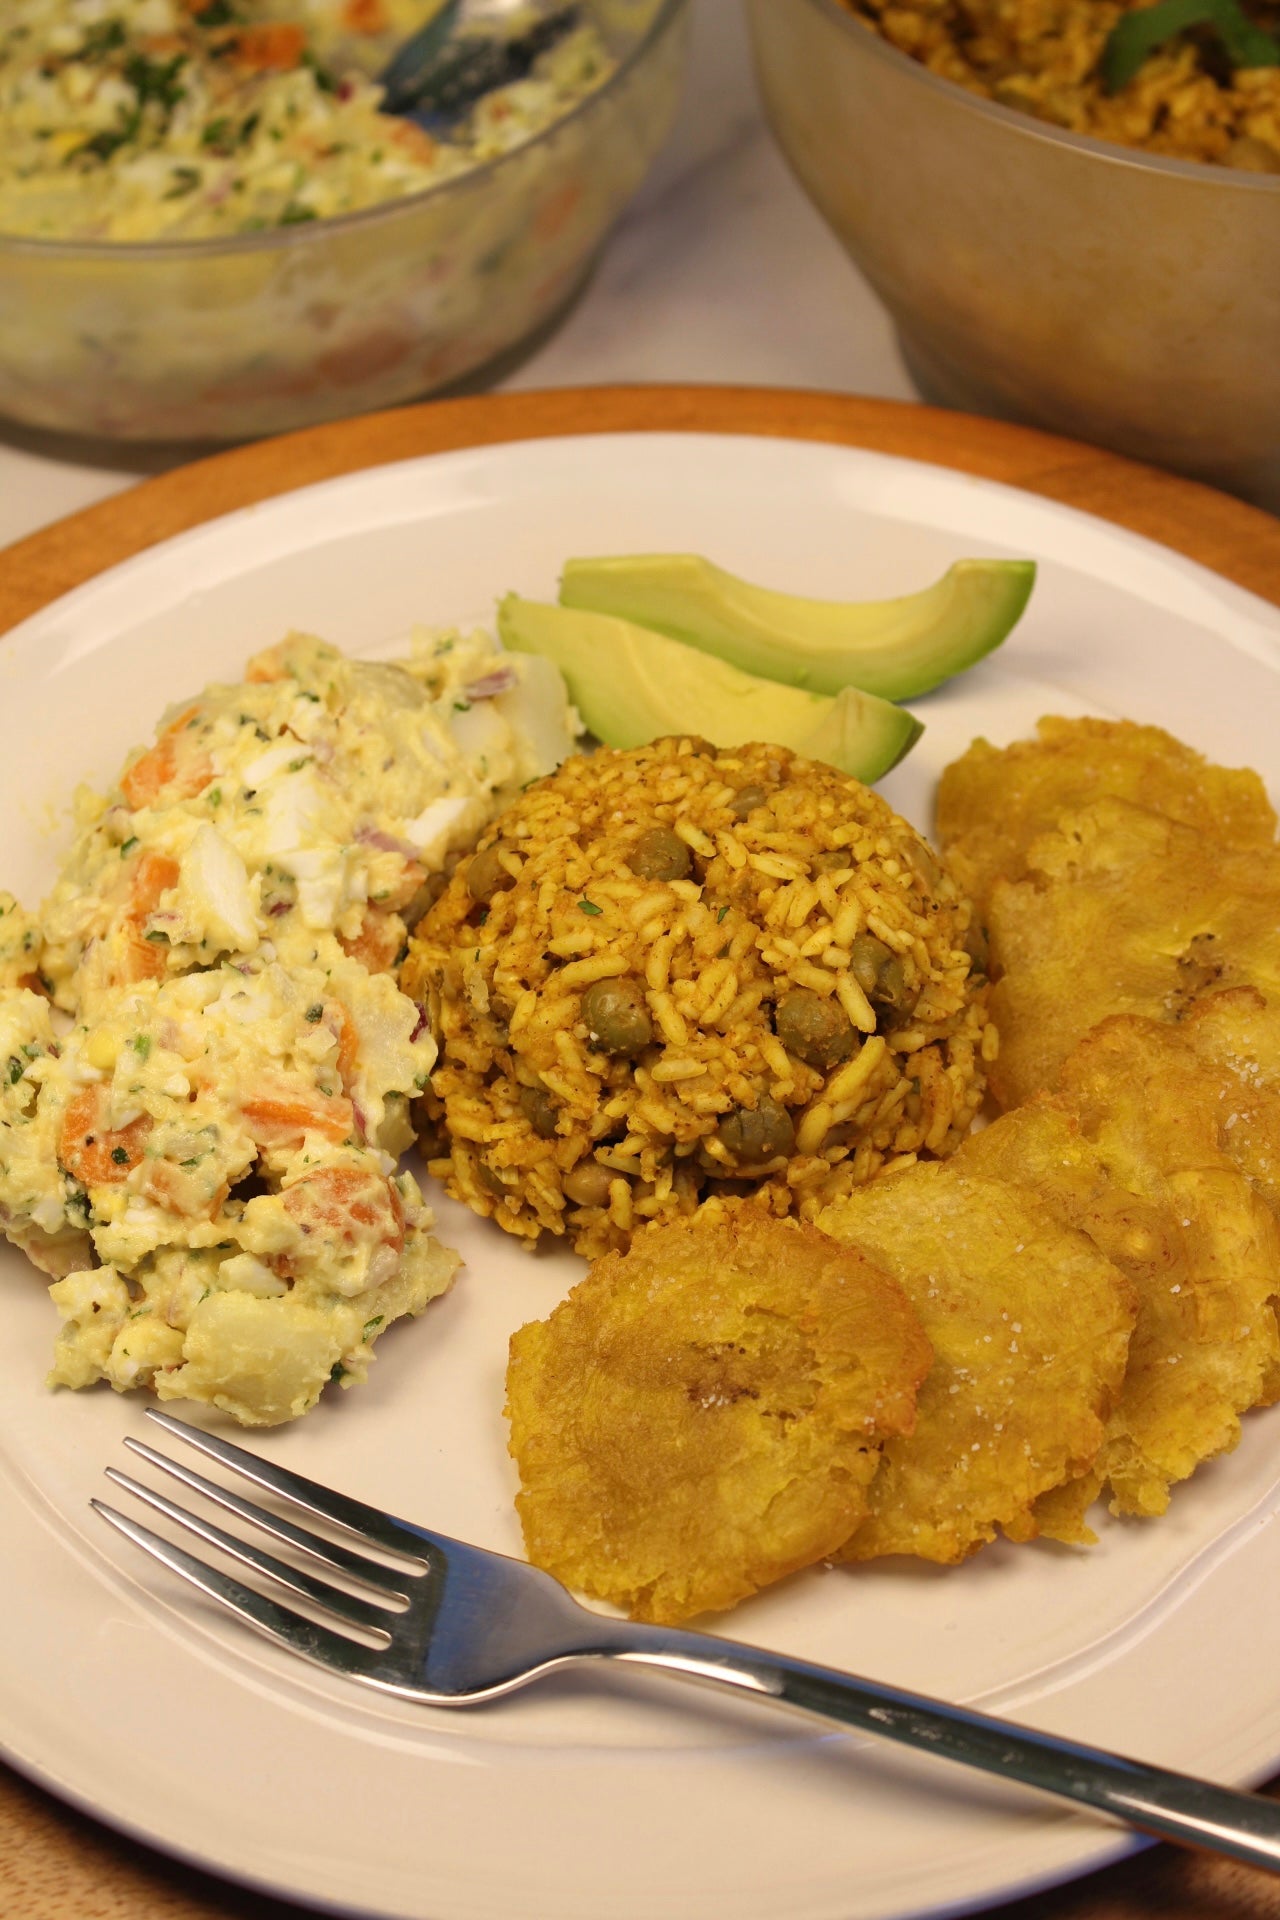 Finished dish with tostones